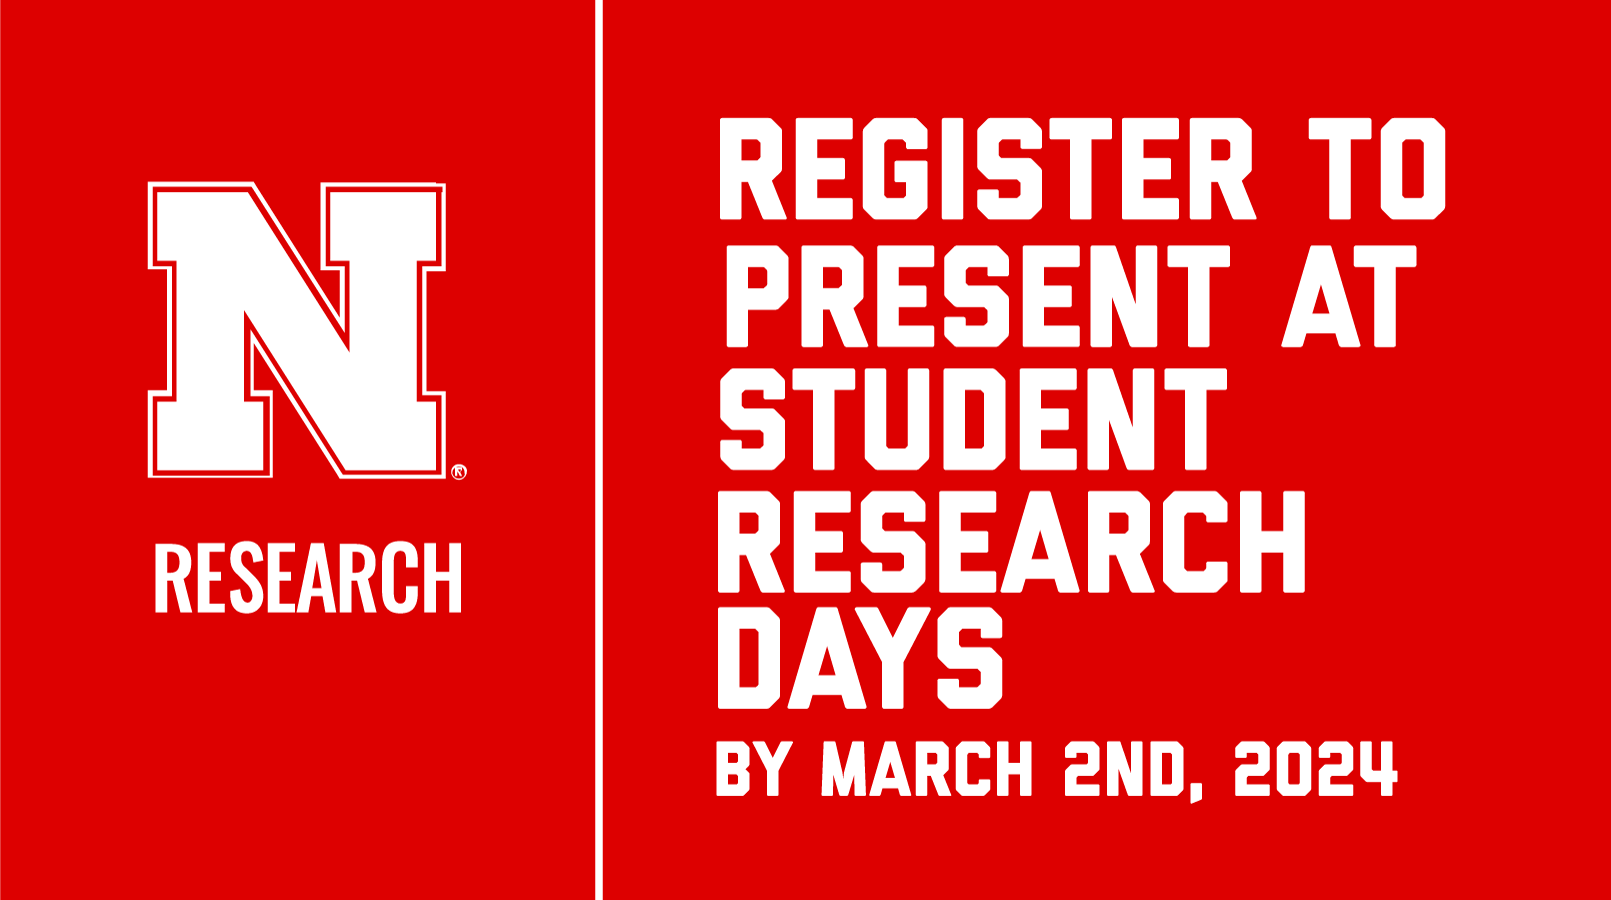 Sign Up to Present at Student Research Days